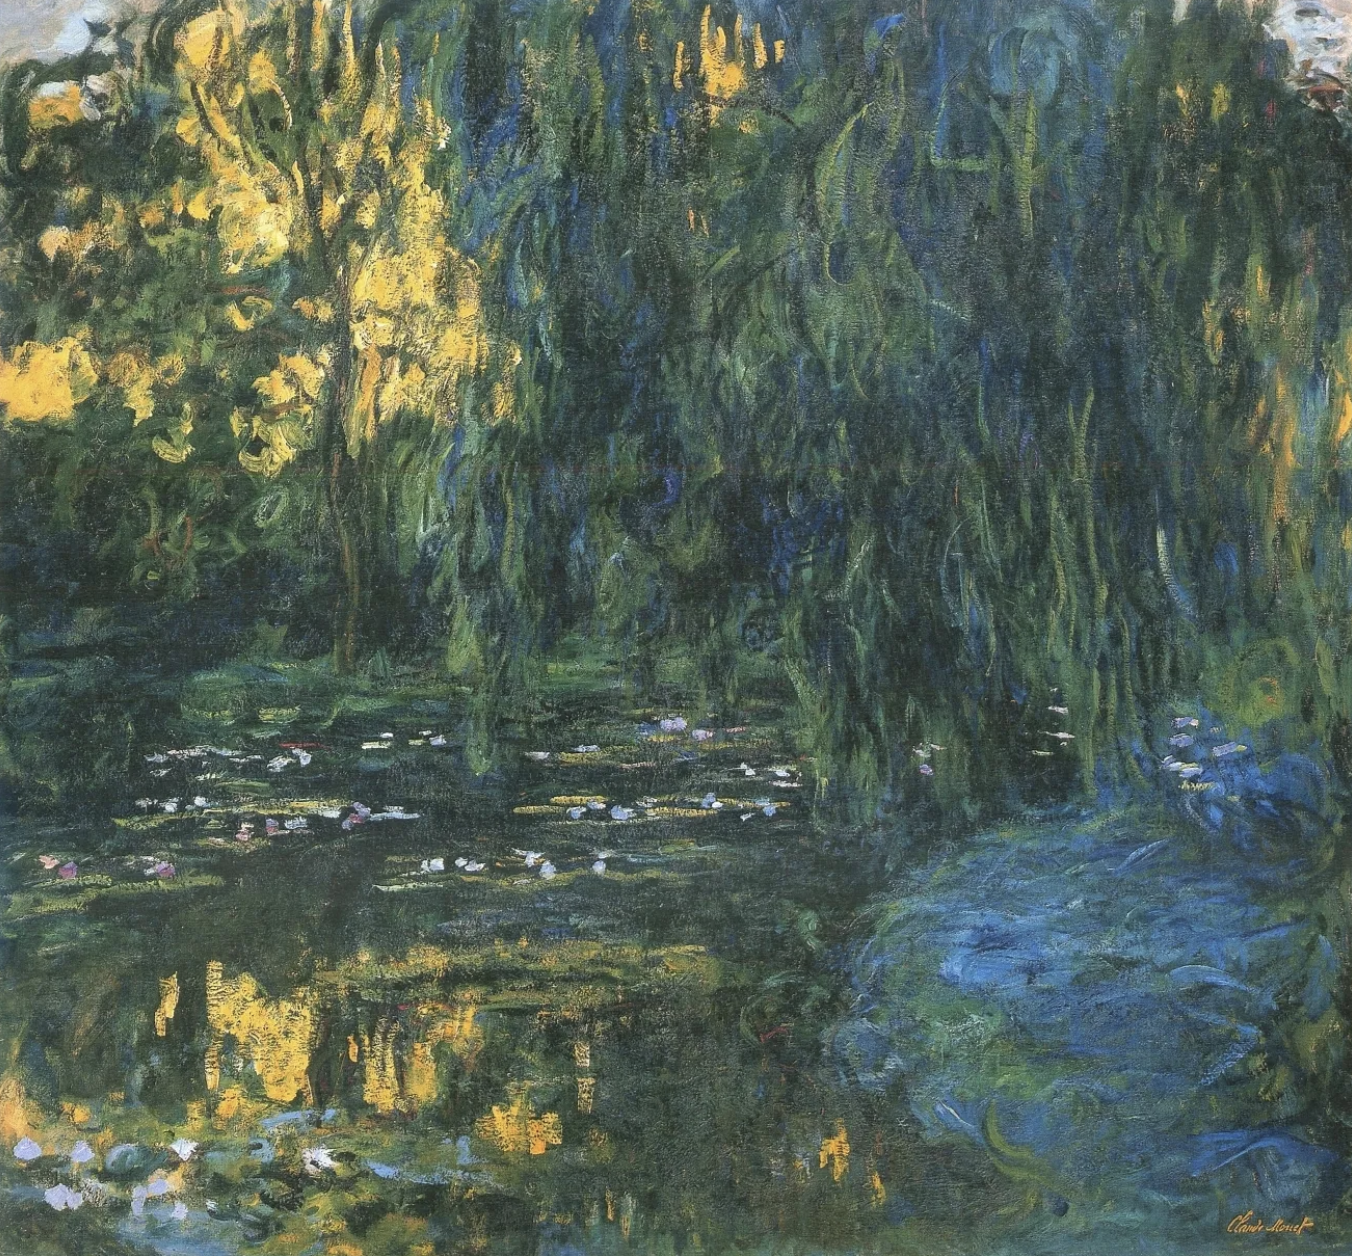 Claude Monet, Water-Lily Pond and Weeping Willow, 1916